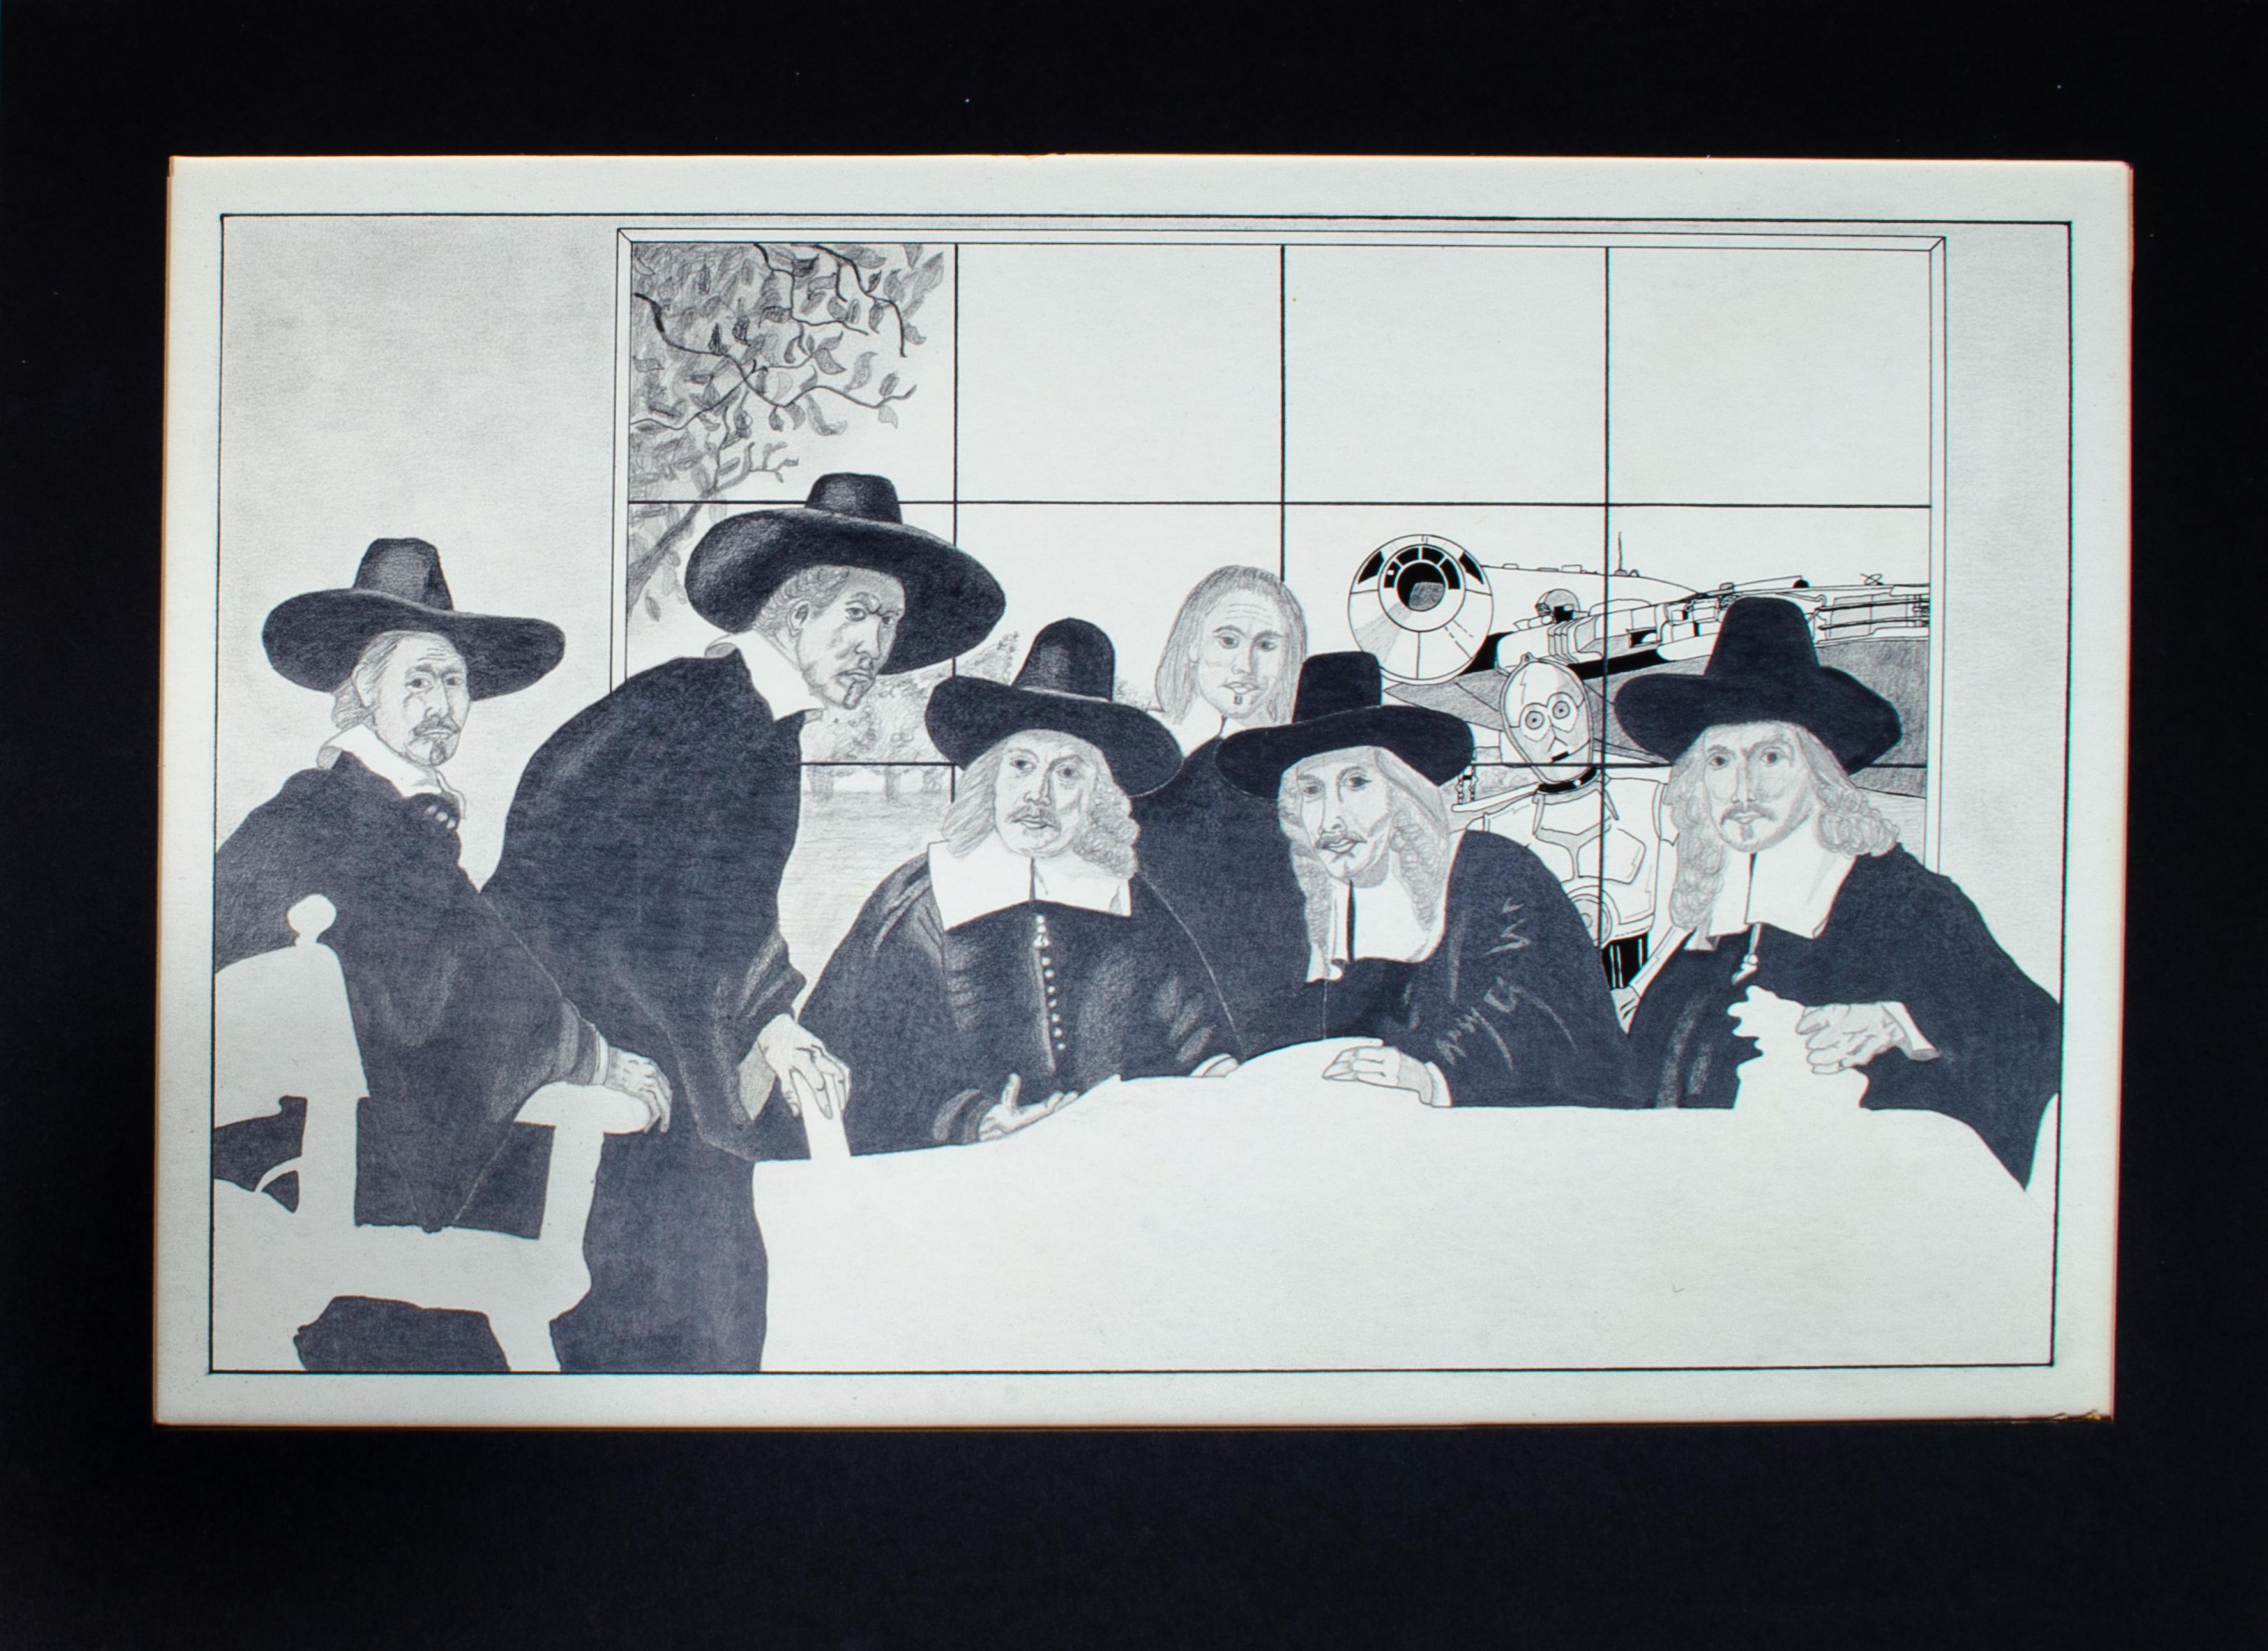 Bernard Nacion
Untitled (Style of Rembrandt), Late 20th Century
Ink and pencil on artist board
19 3/4 x 15 in.

This illustration shows a group of Dutch gentlemen in the style of Rembrandt van Rijn grouped around a table, while the Millennium Falcon